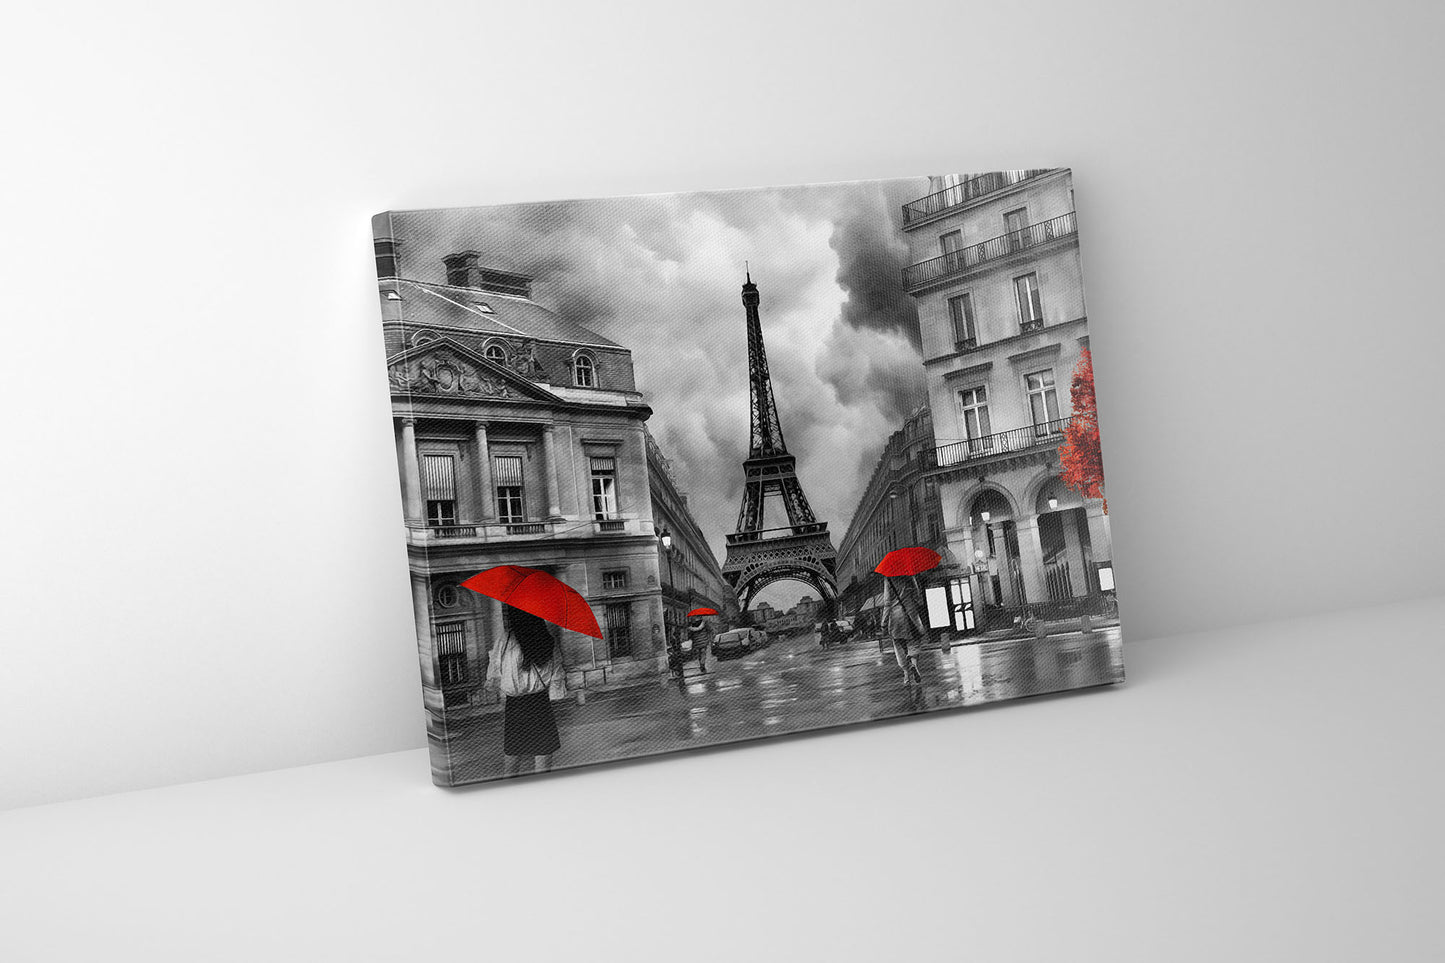 Canvas Wall Art-Painterly Paris With Red Accents- Fine Artwork